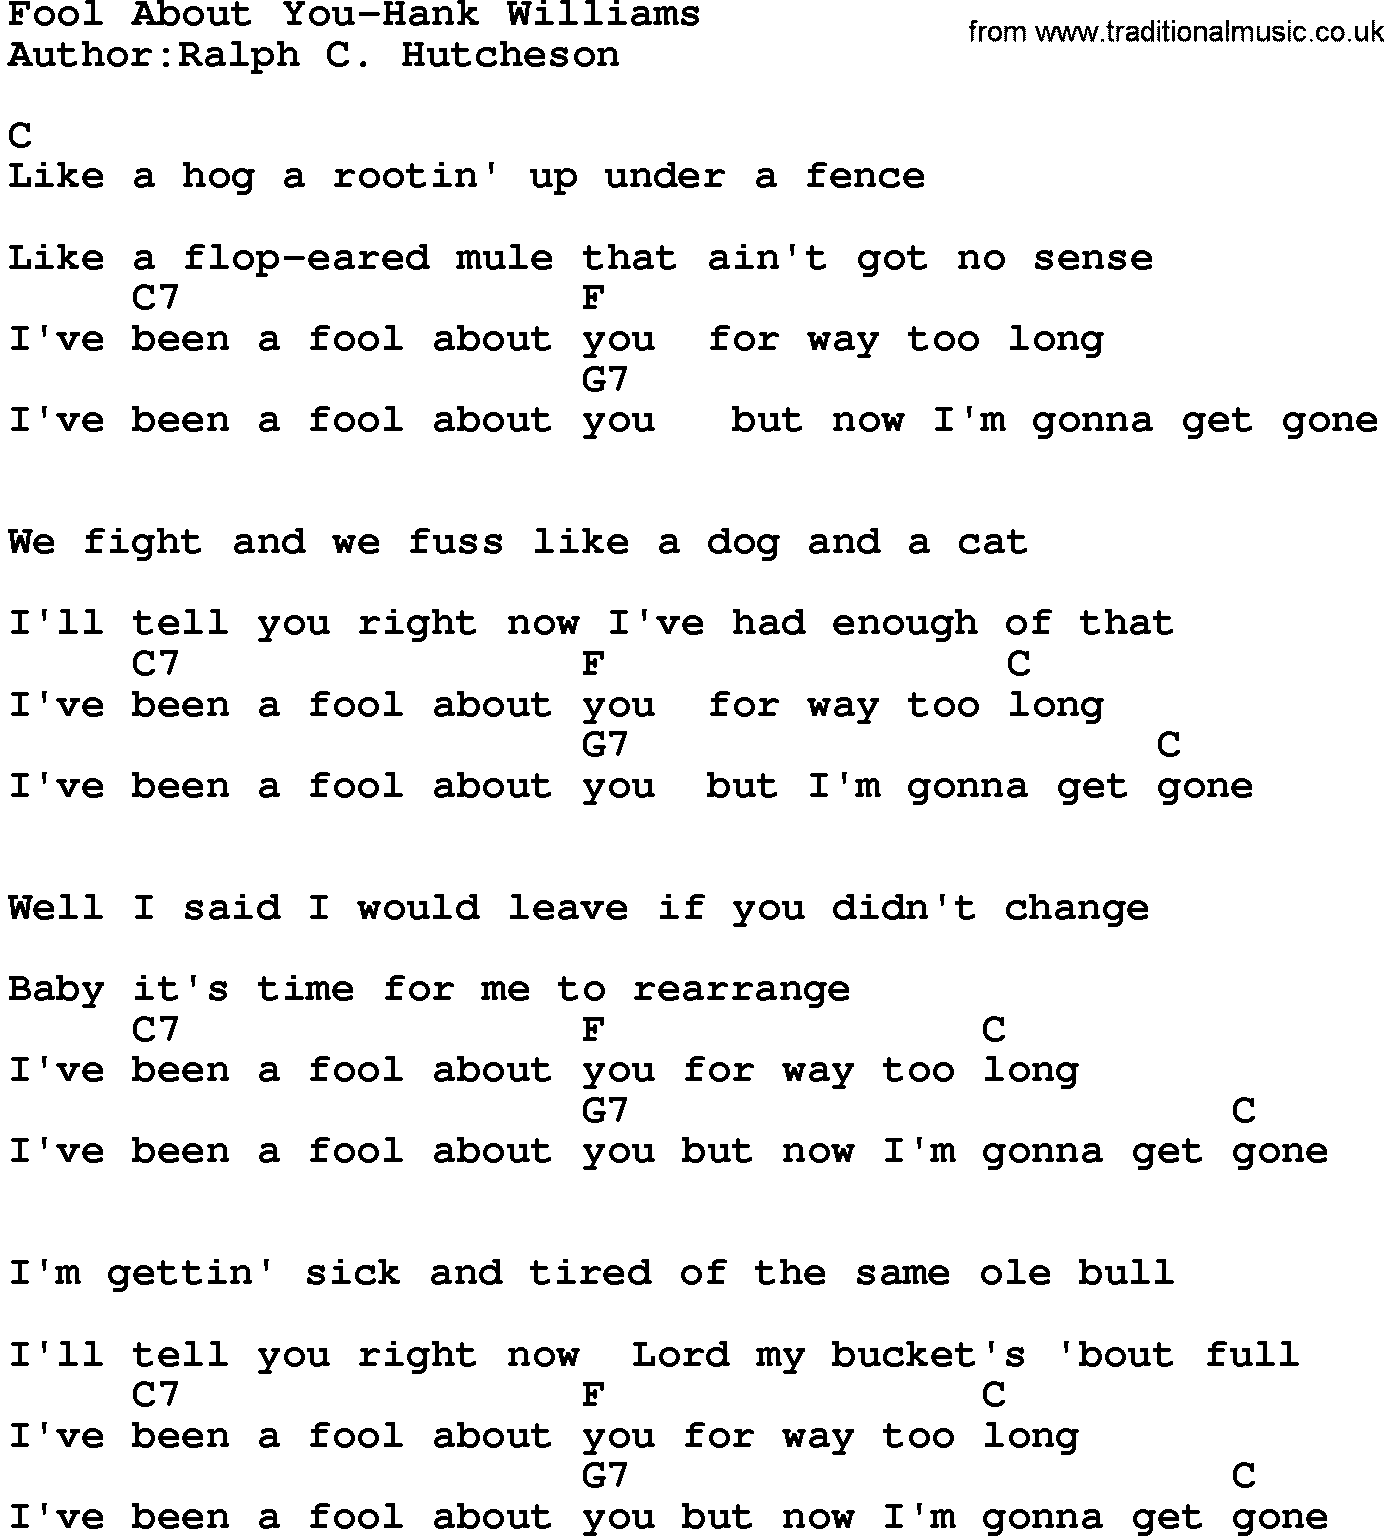 Country music song: Fool About You-Hank Williams lyrics and chords